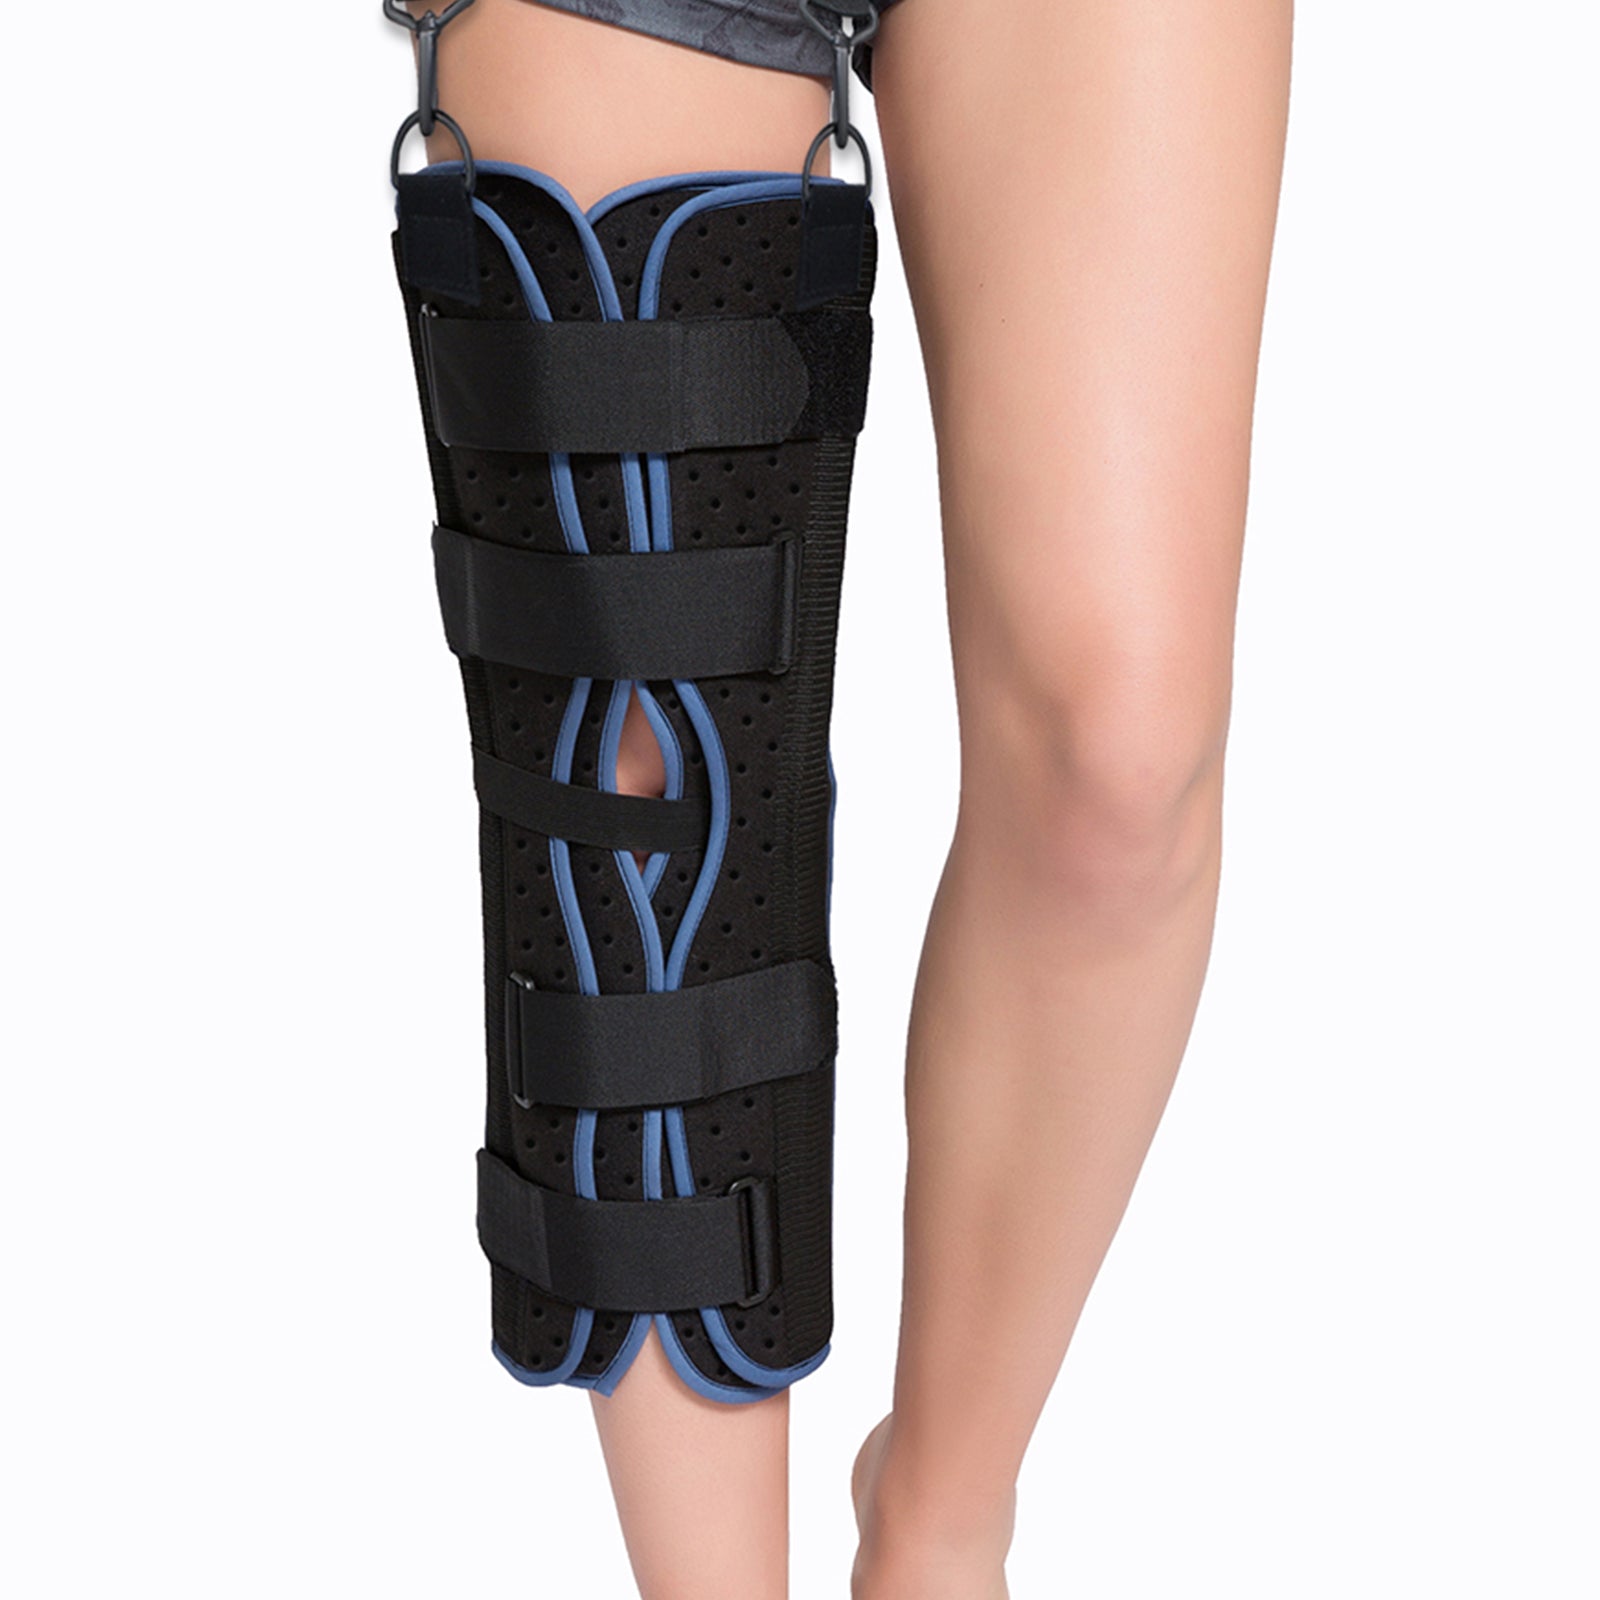 Tri-Panel Knee Immobilizer Post-Op Hinged Orthopedic Knee Support